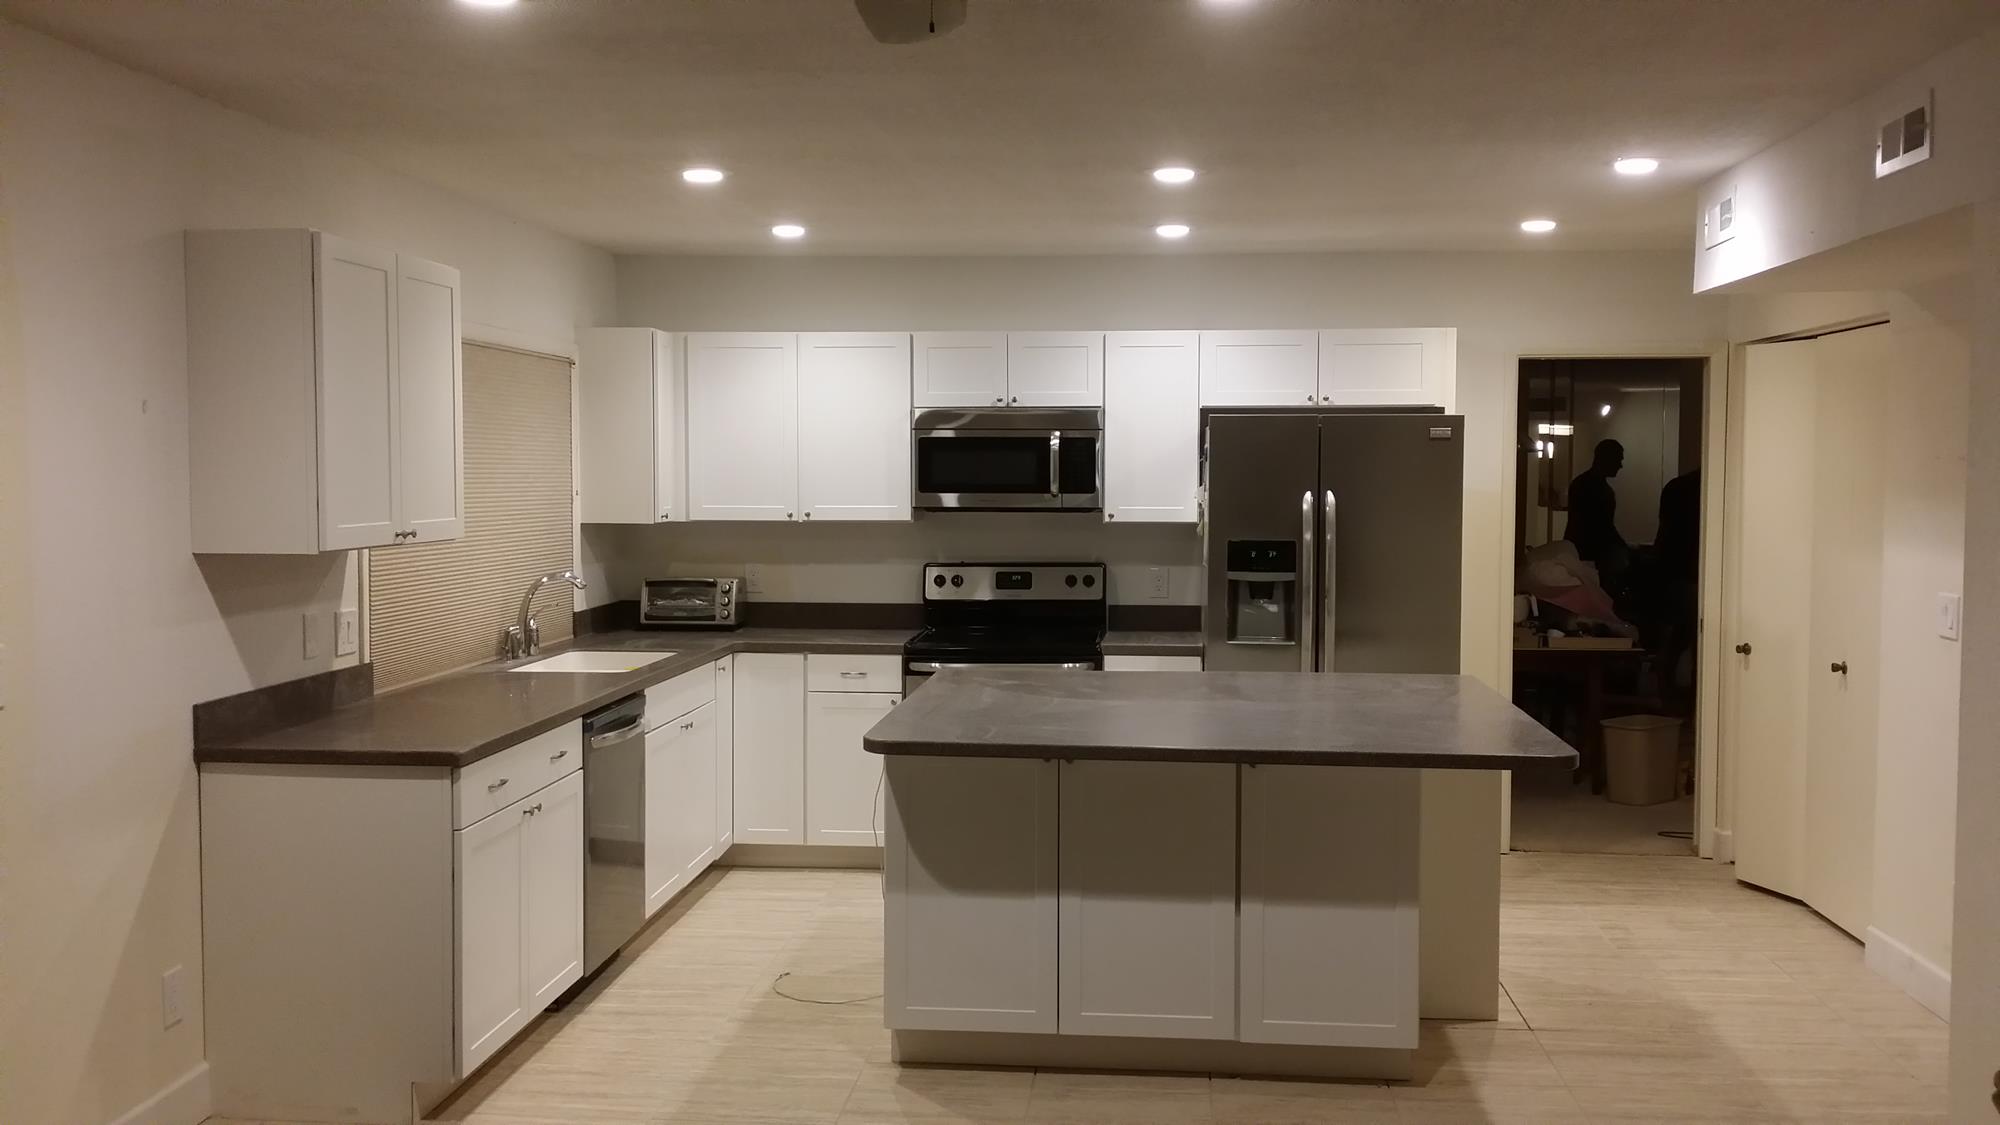 Completed kitchen remodel